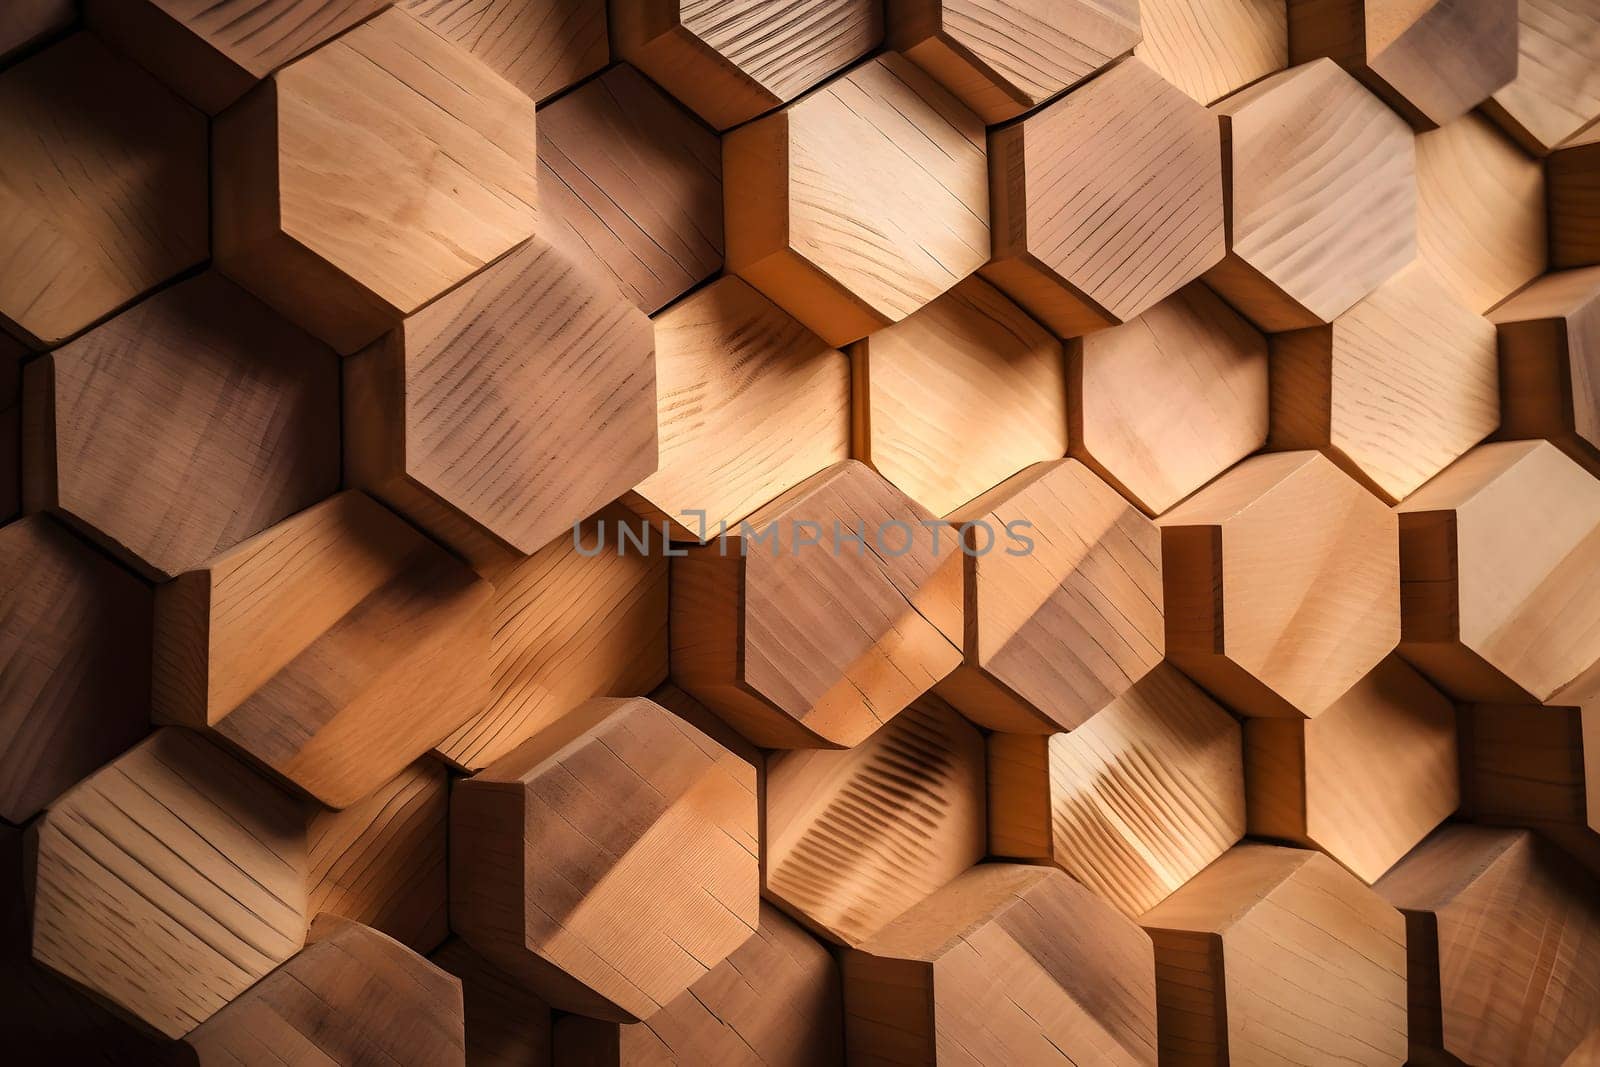 Closeup full-frame background of tiled hexagonal wooden dowel ends. Neural network generated in May 2023. Not based on any actual person, scene or pattern.